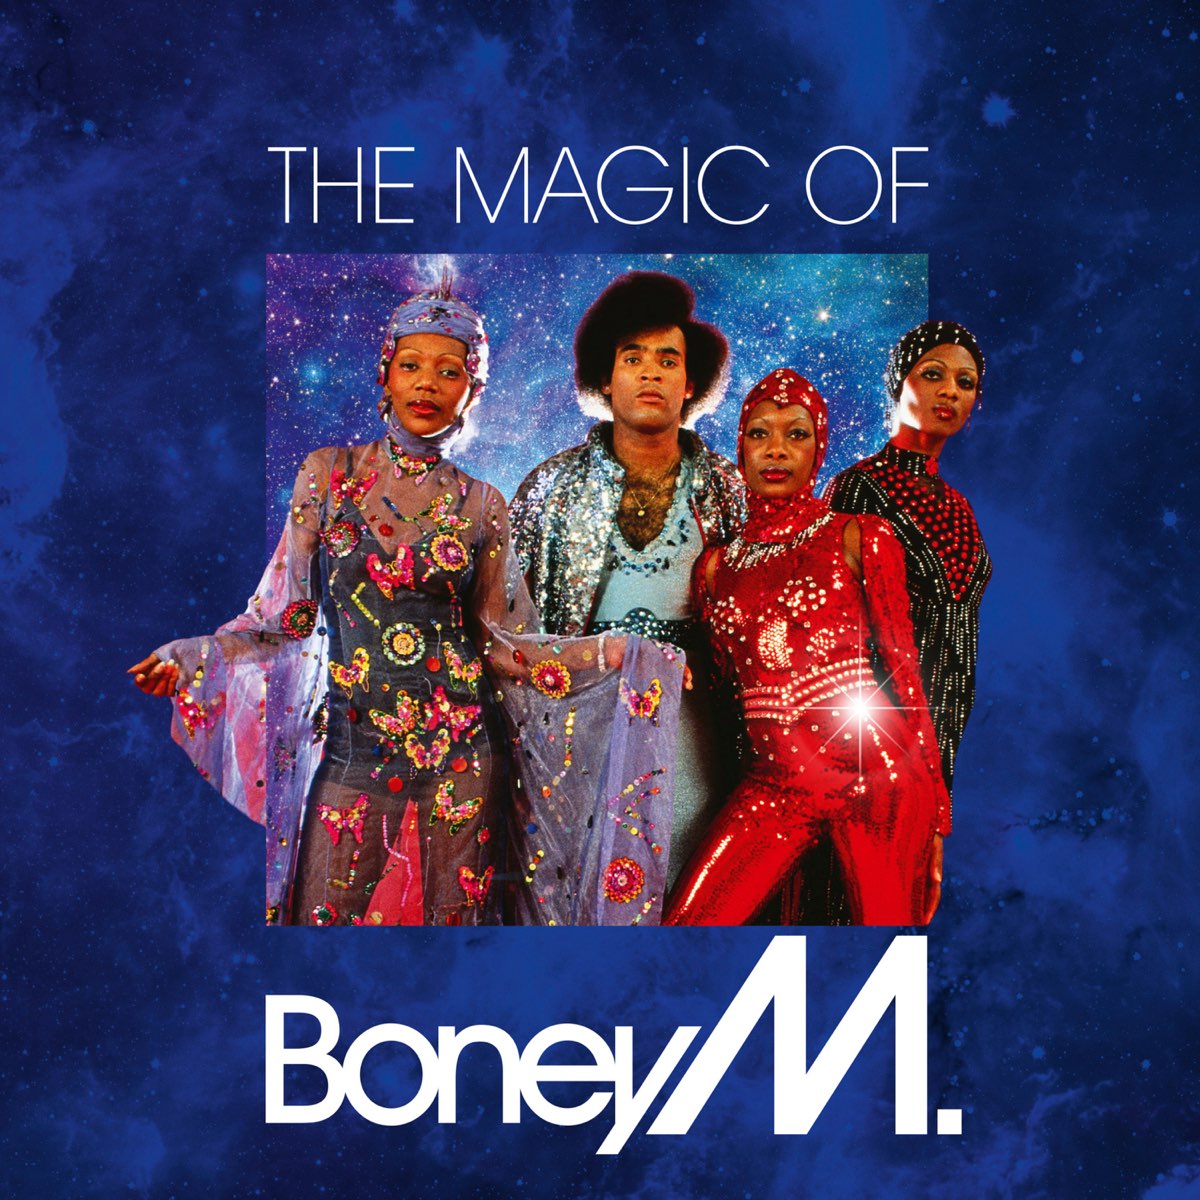 The Magic Of Boney M. (Special Remix Edition) by Boney M. on Apple Music